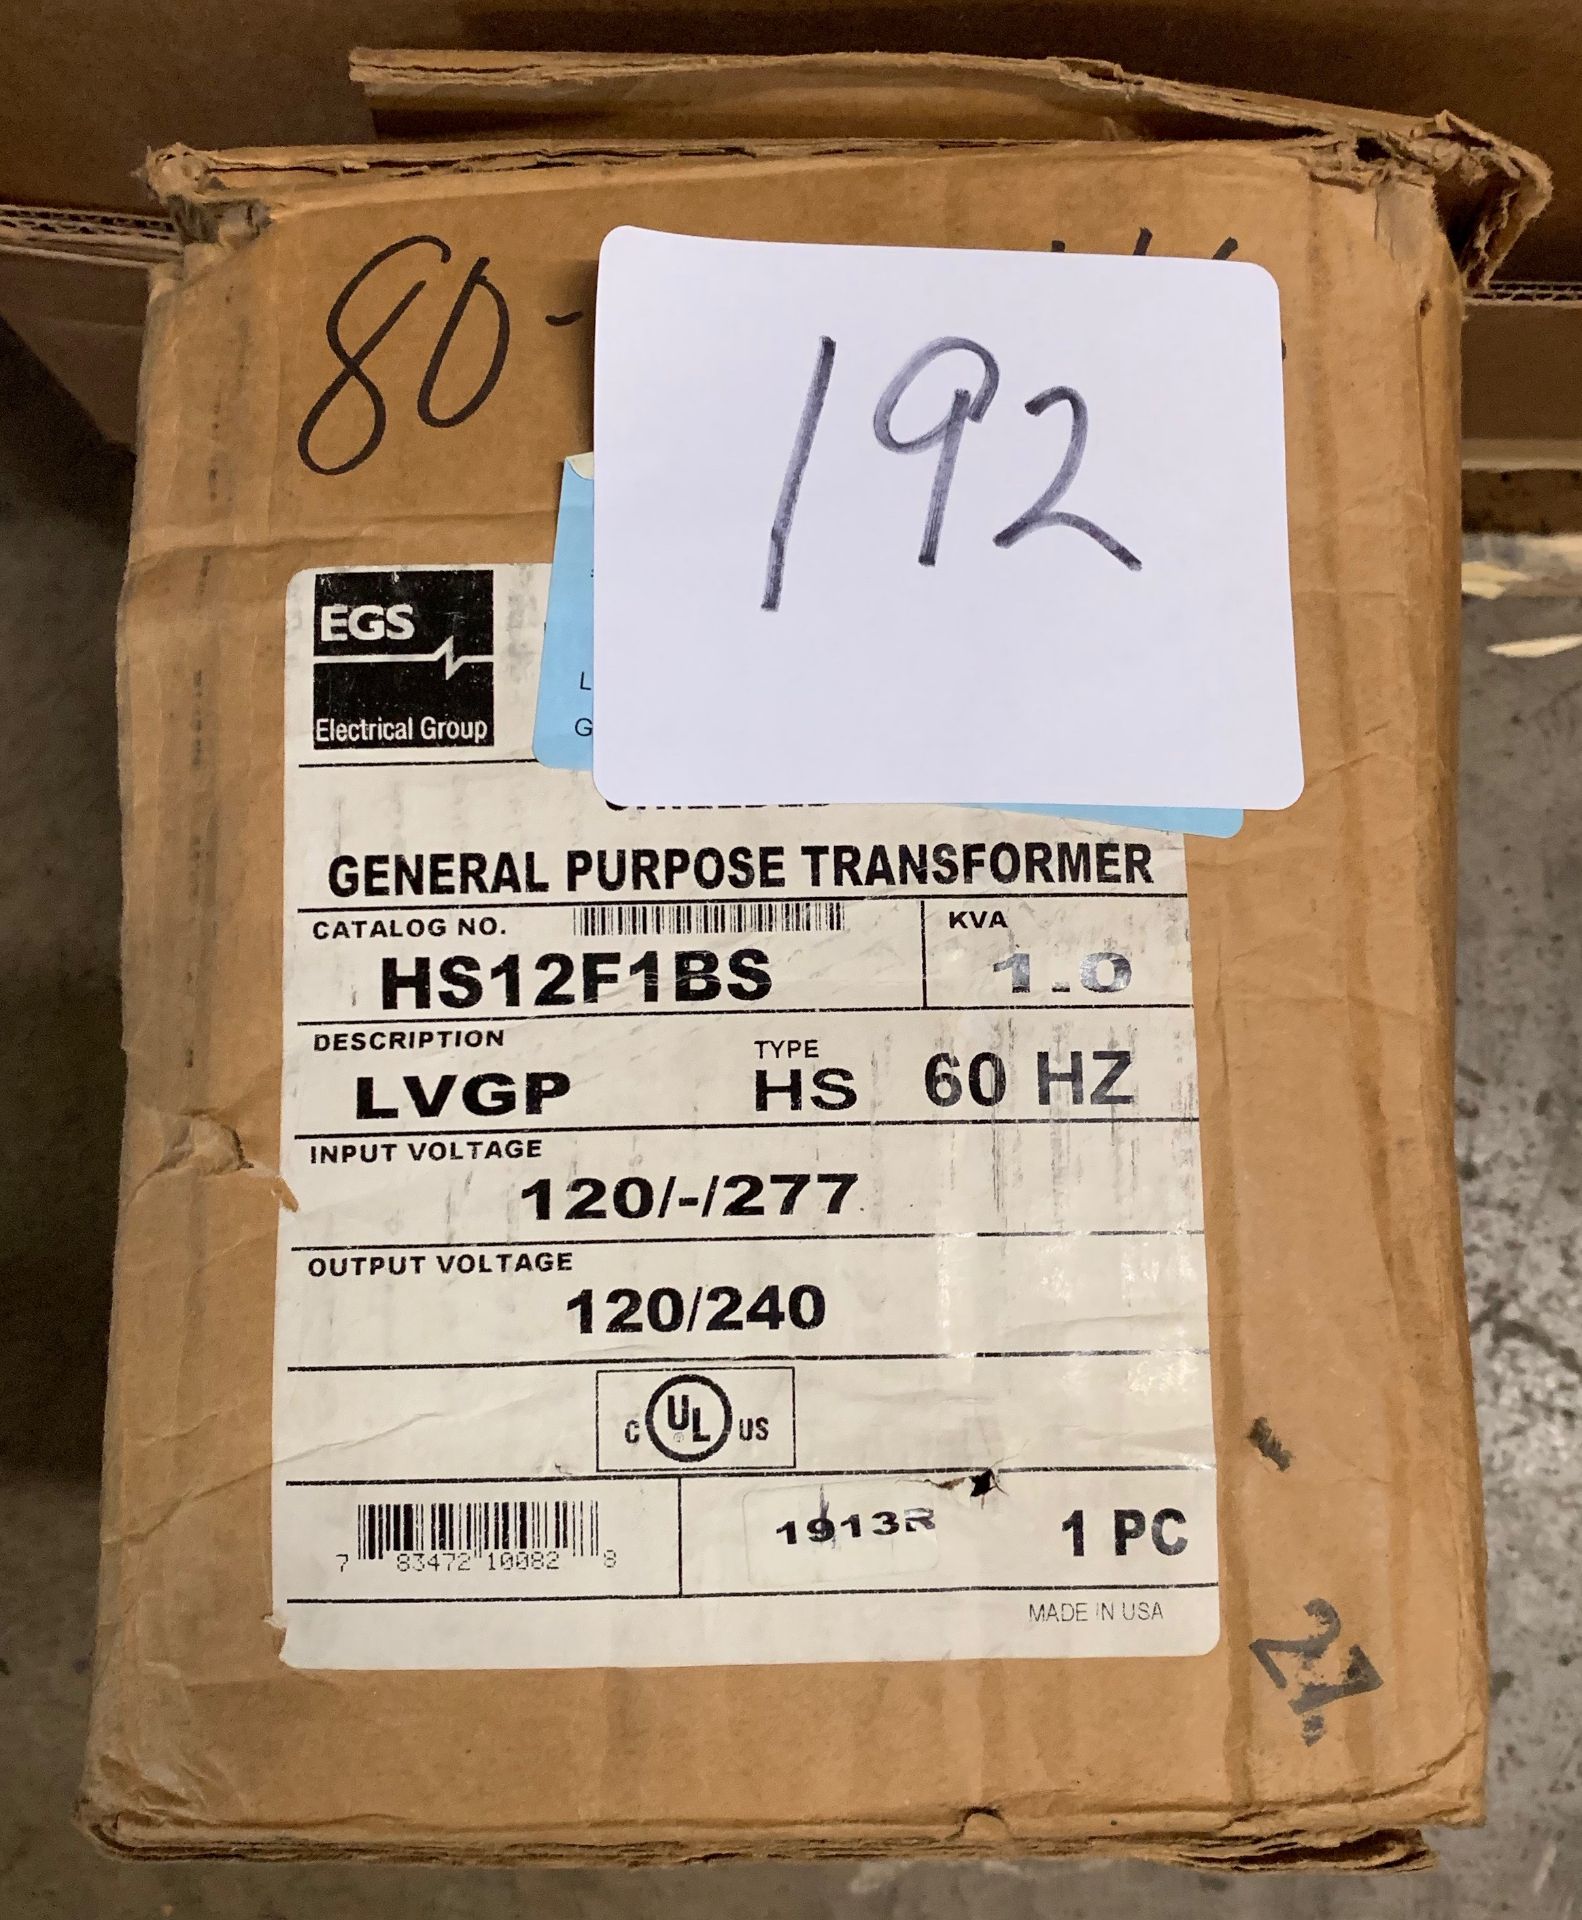 EGS HEVI-DUTY GENERAL PURPOSE TRANSFORMER CAT # HS12F1BS - new, never used - List price $342